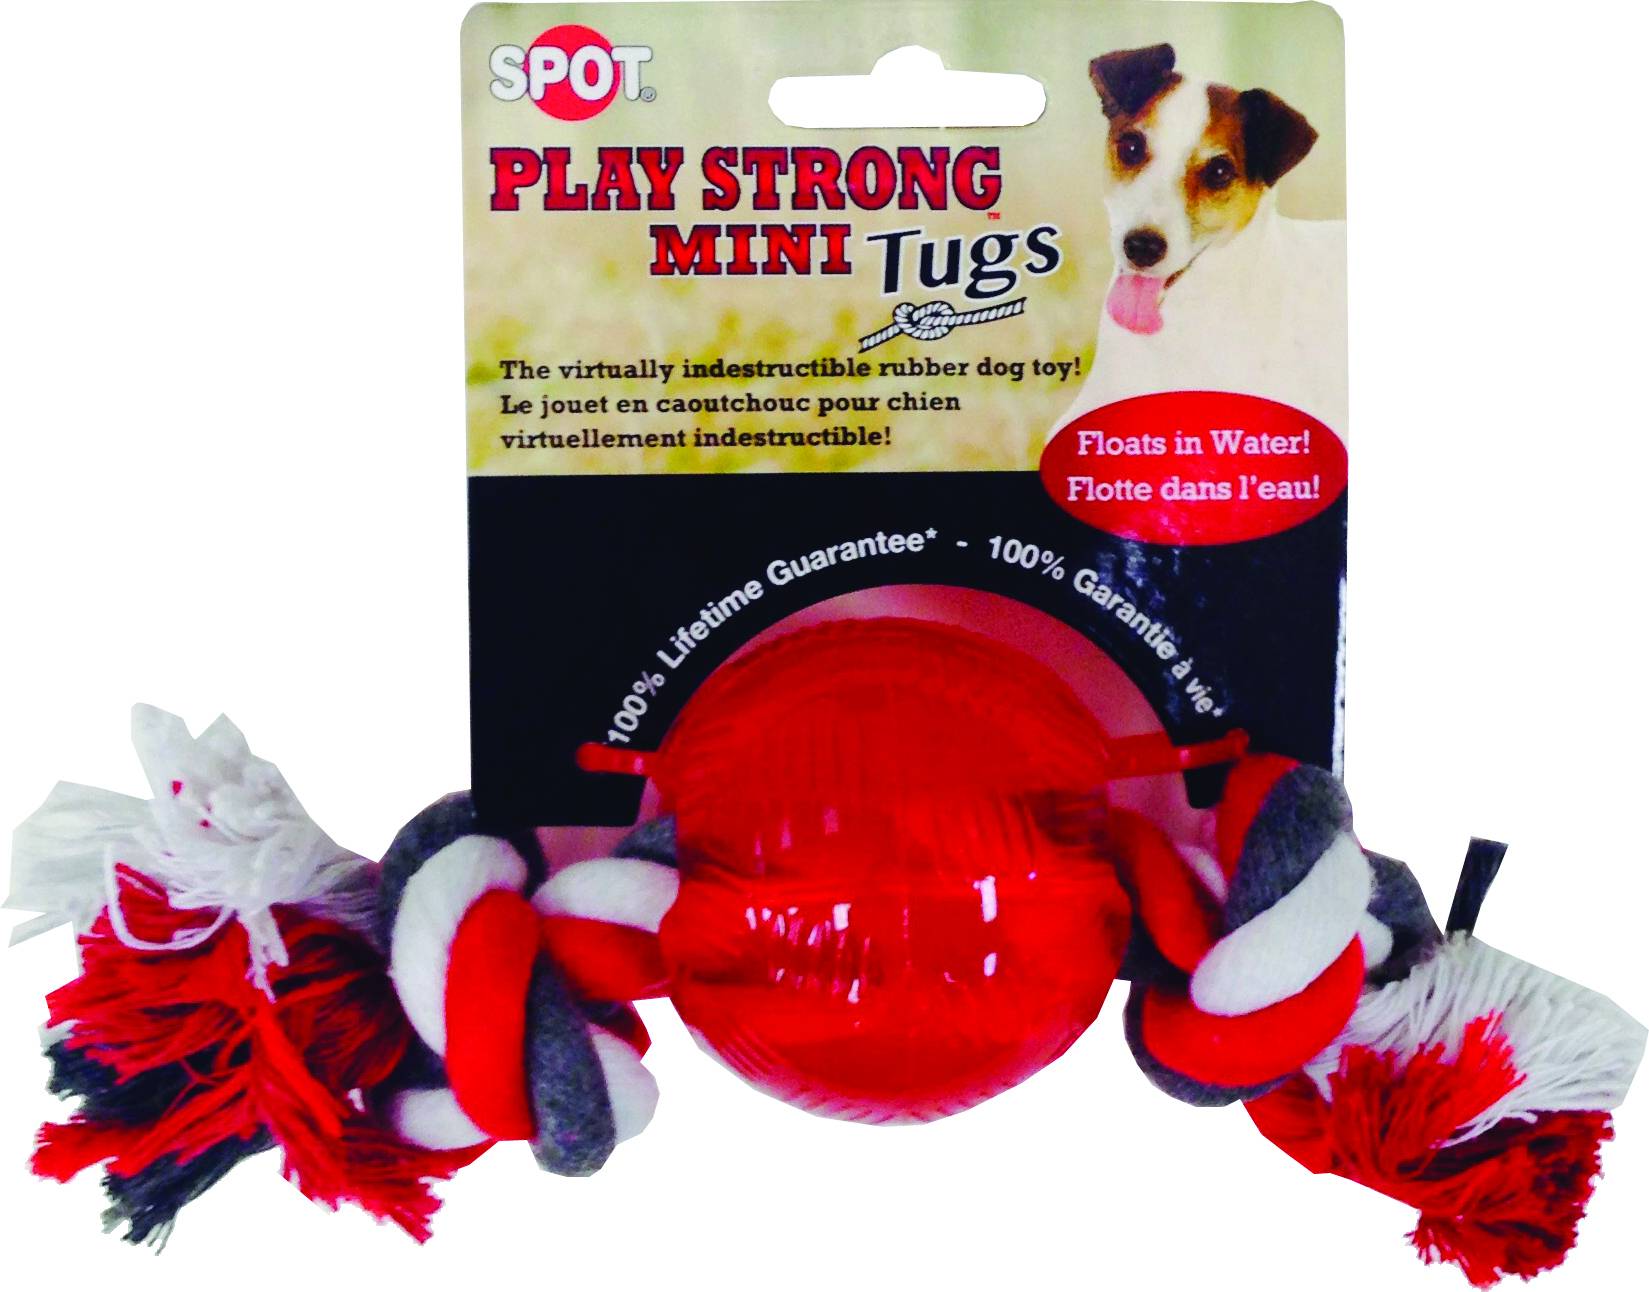 play strong dog toy guarantee